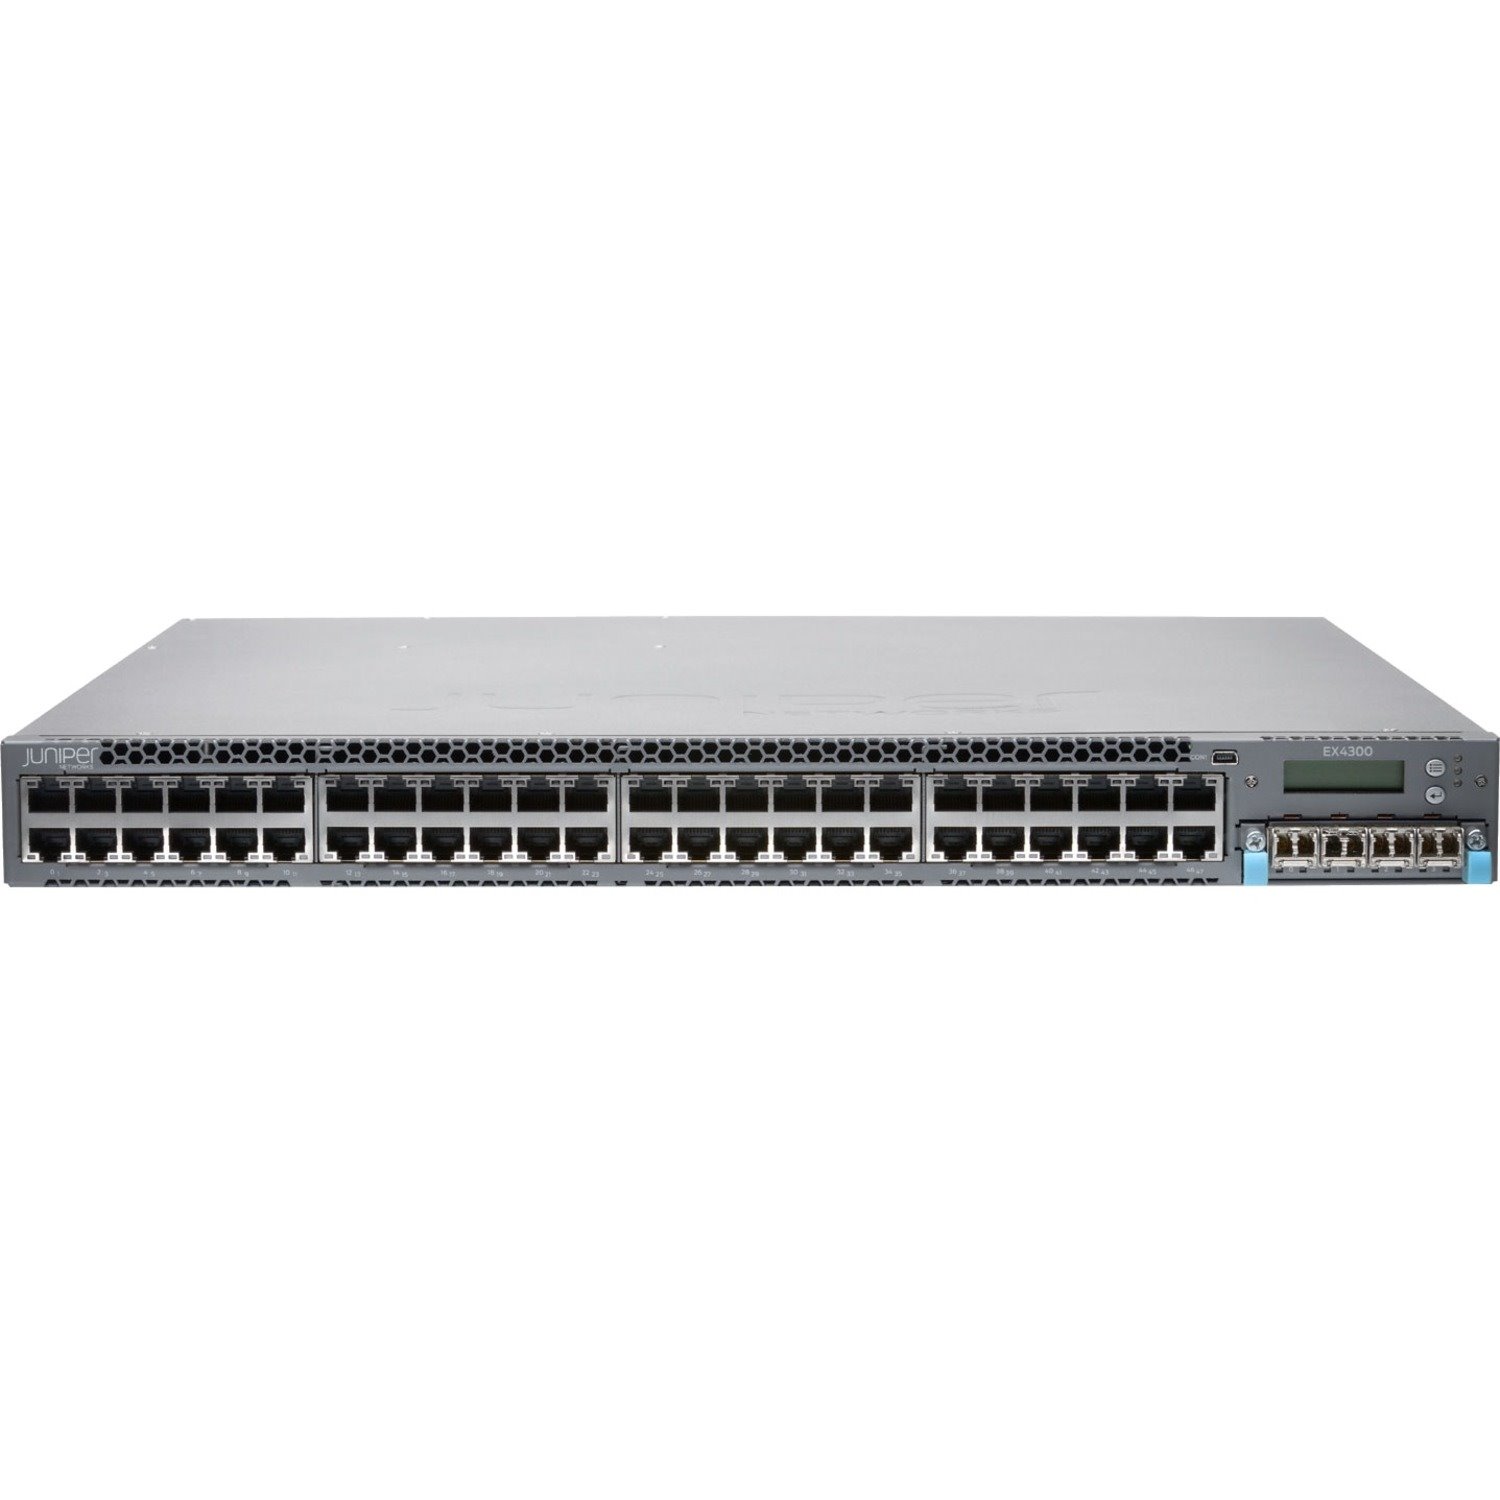 Juniper EX4300 EX4300-48P 48 Ports Manageable Ethernet Switch - 10/100/1000Base-T